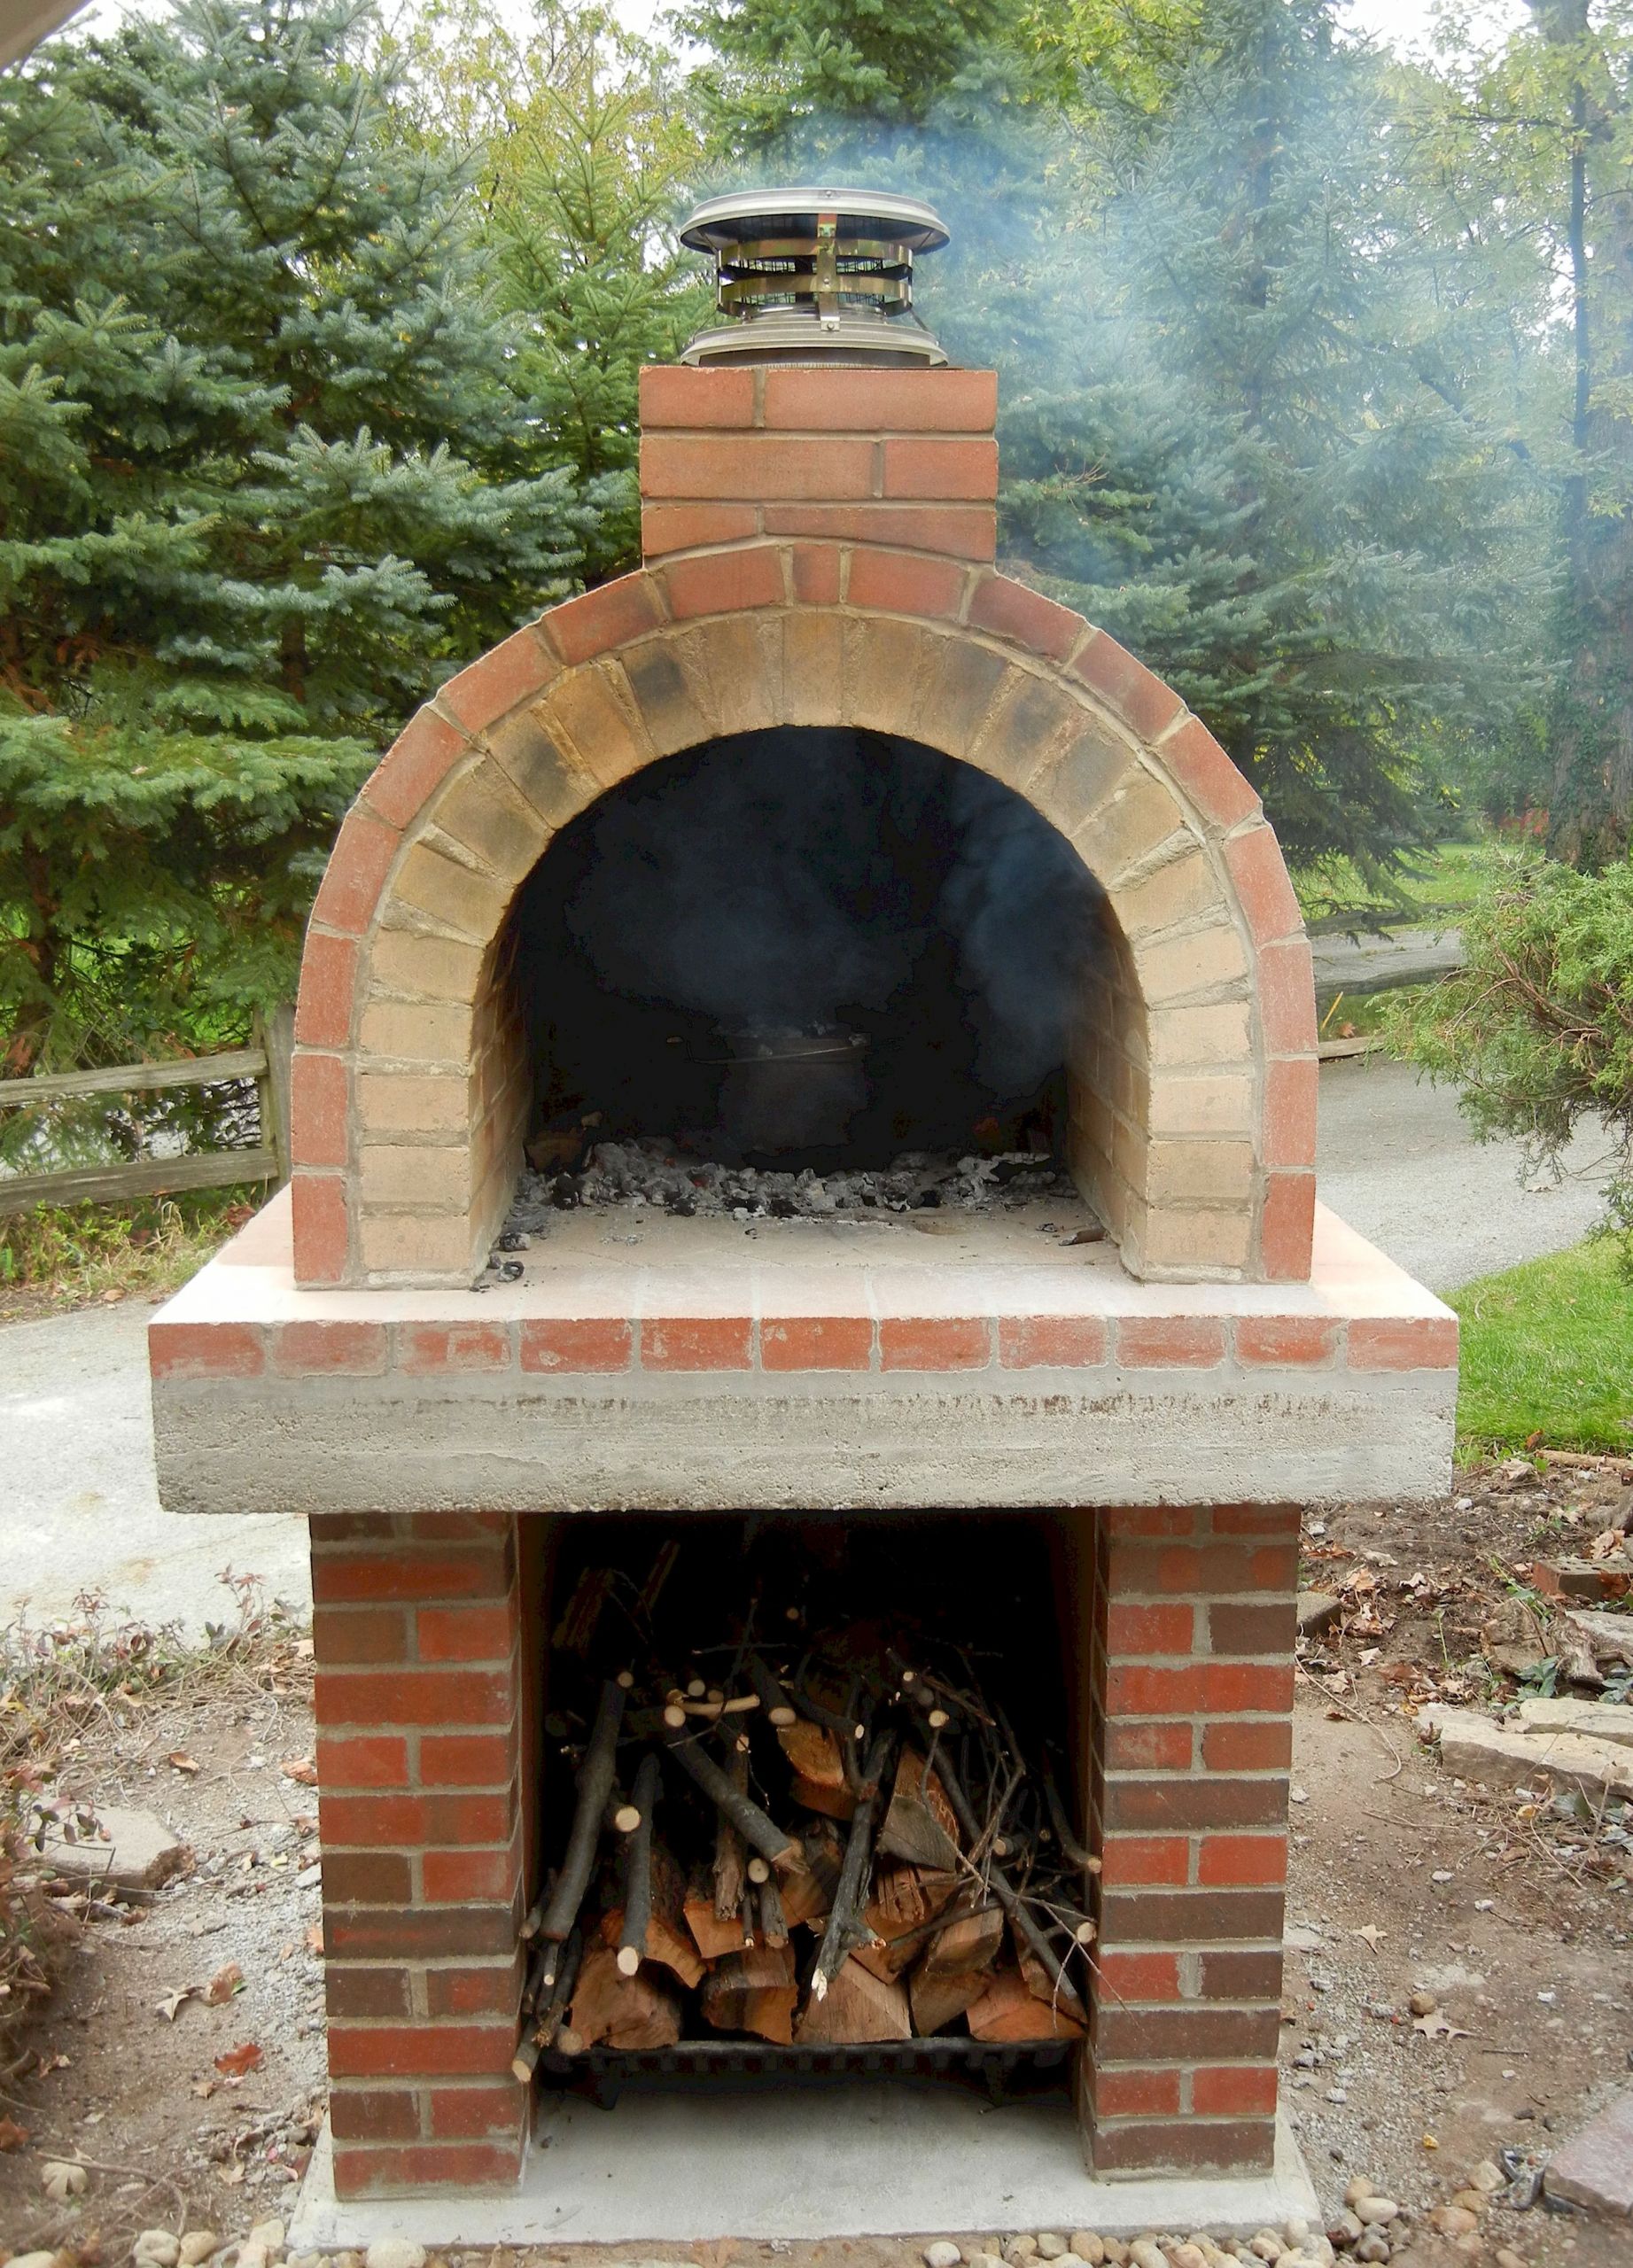 DIY Outdoor Bread Oven
 This beautiful wood fired oven resides in Northern